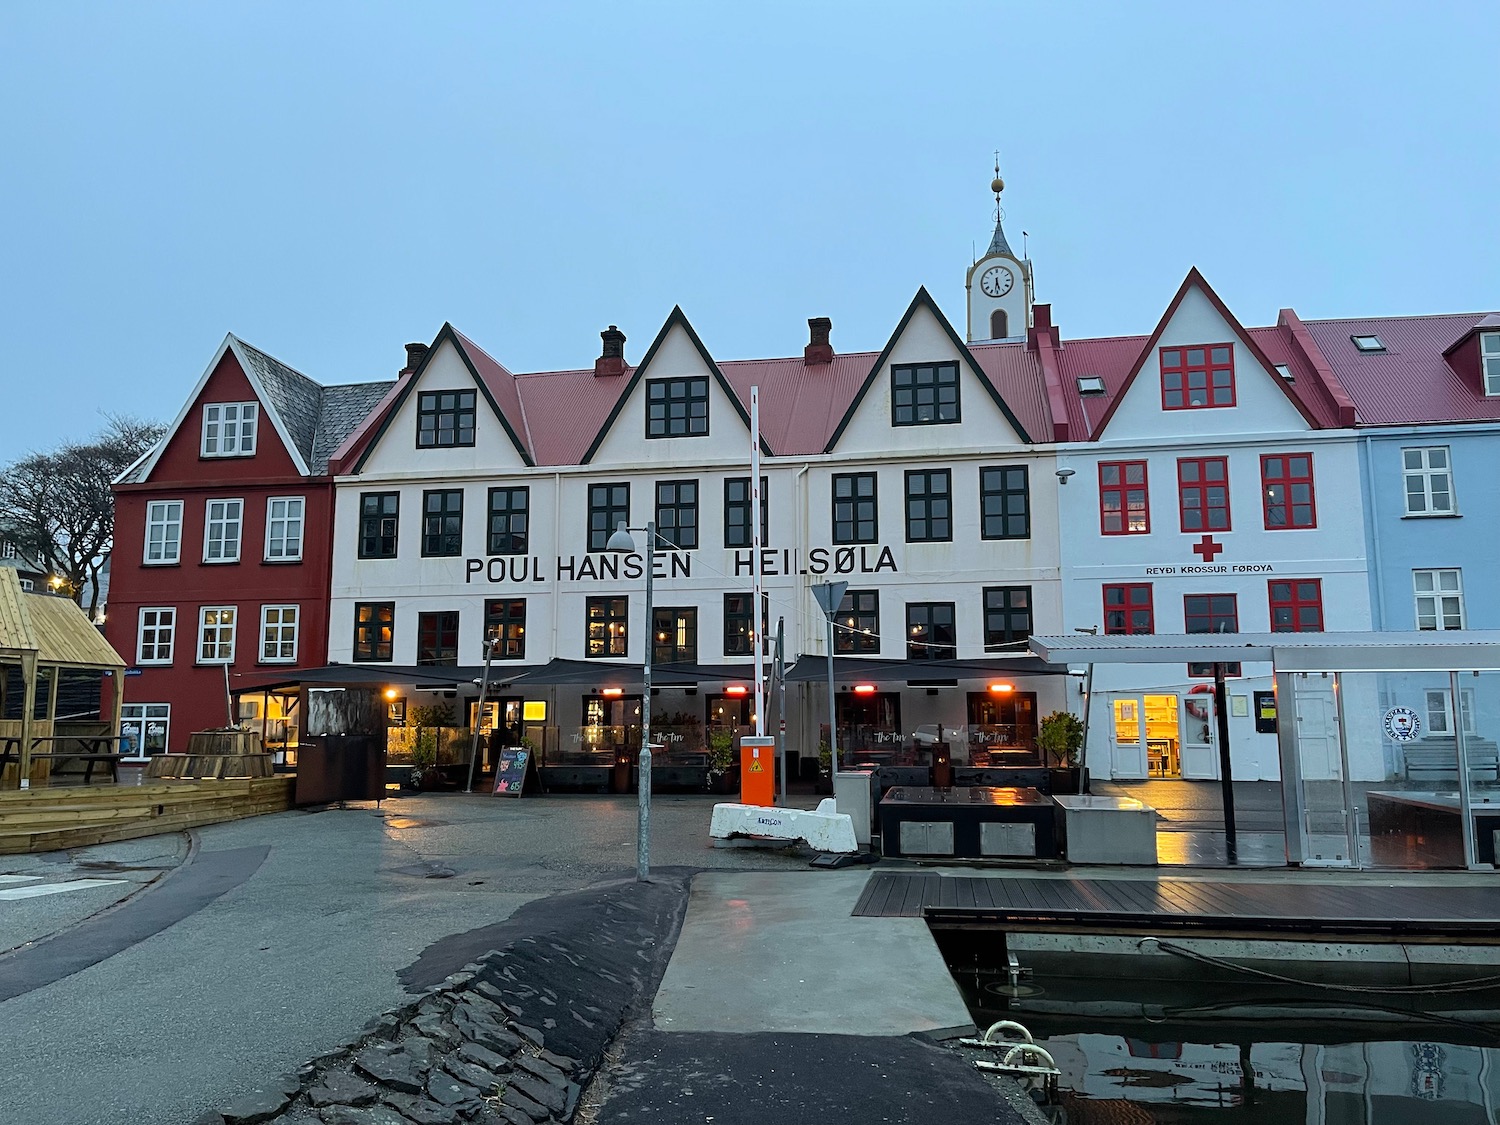 Bryggen with a clock tower